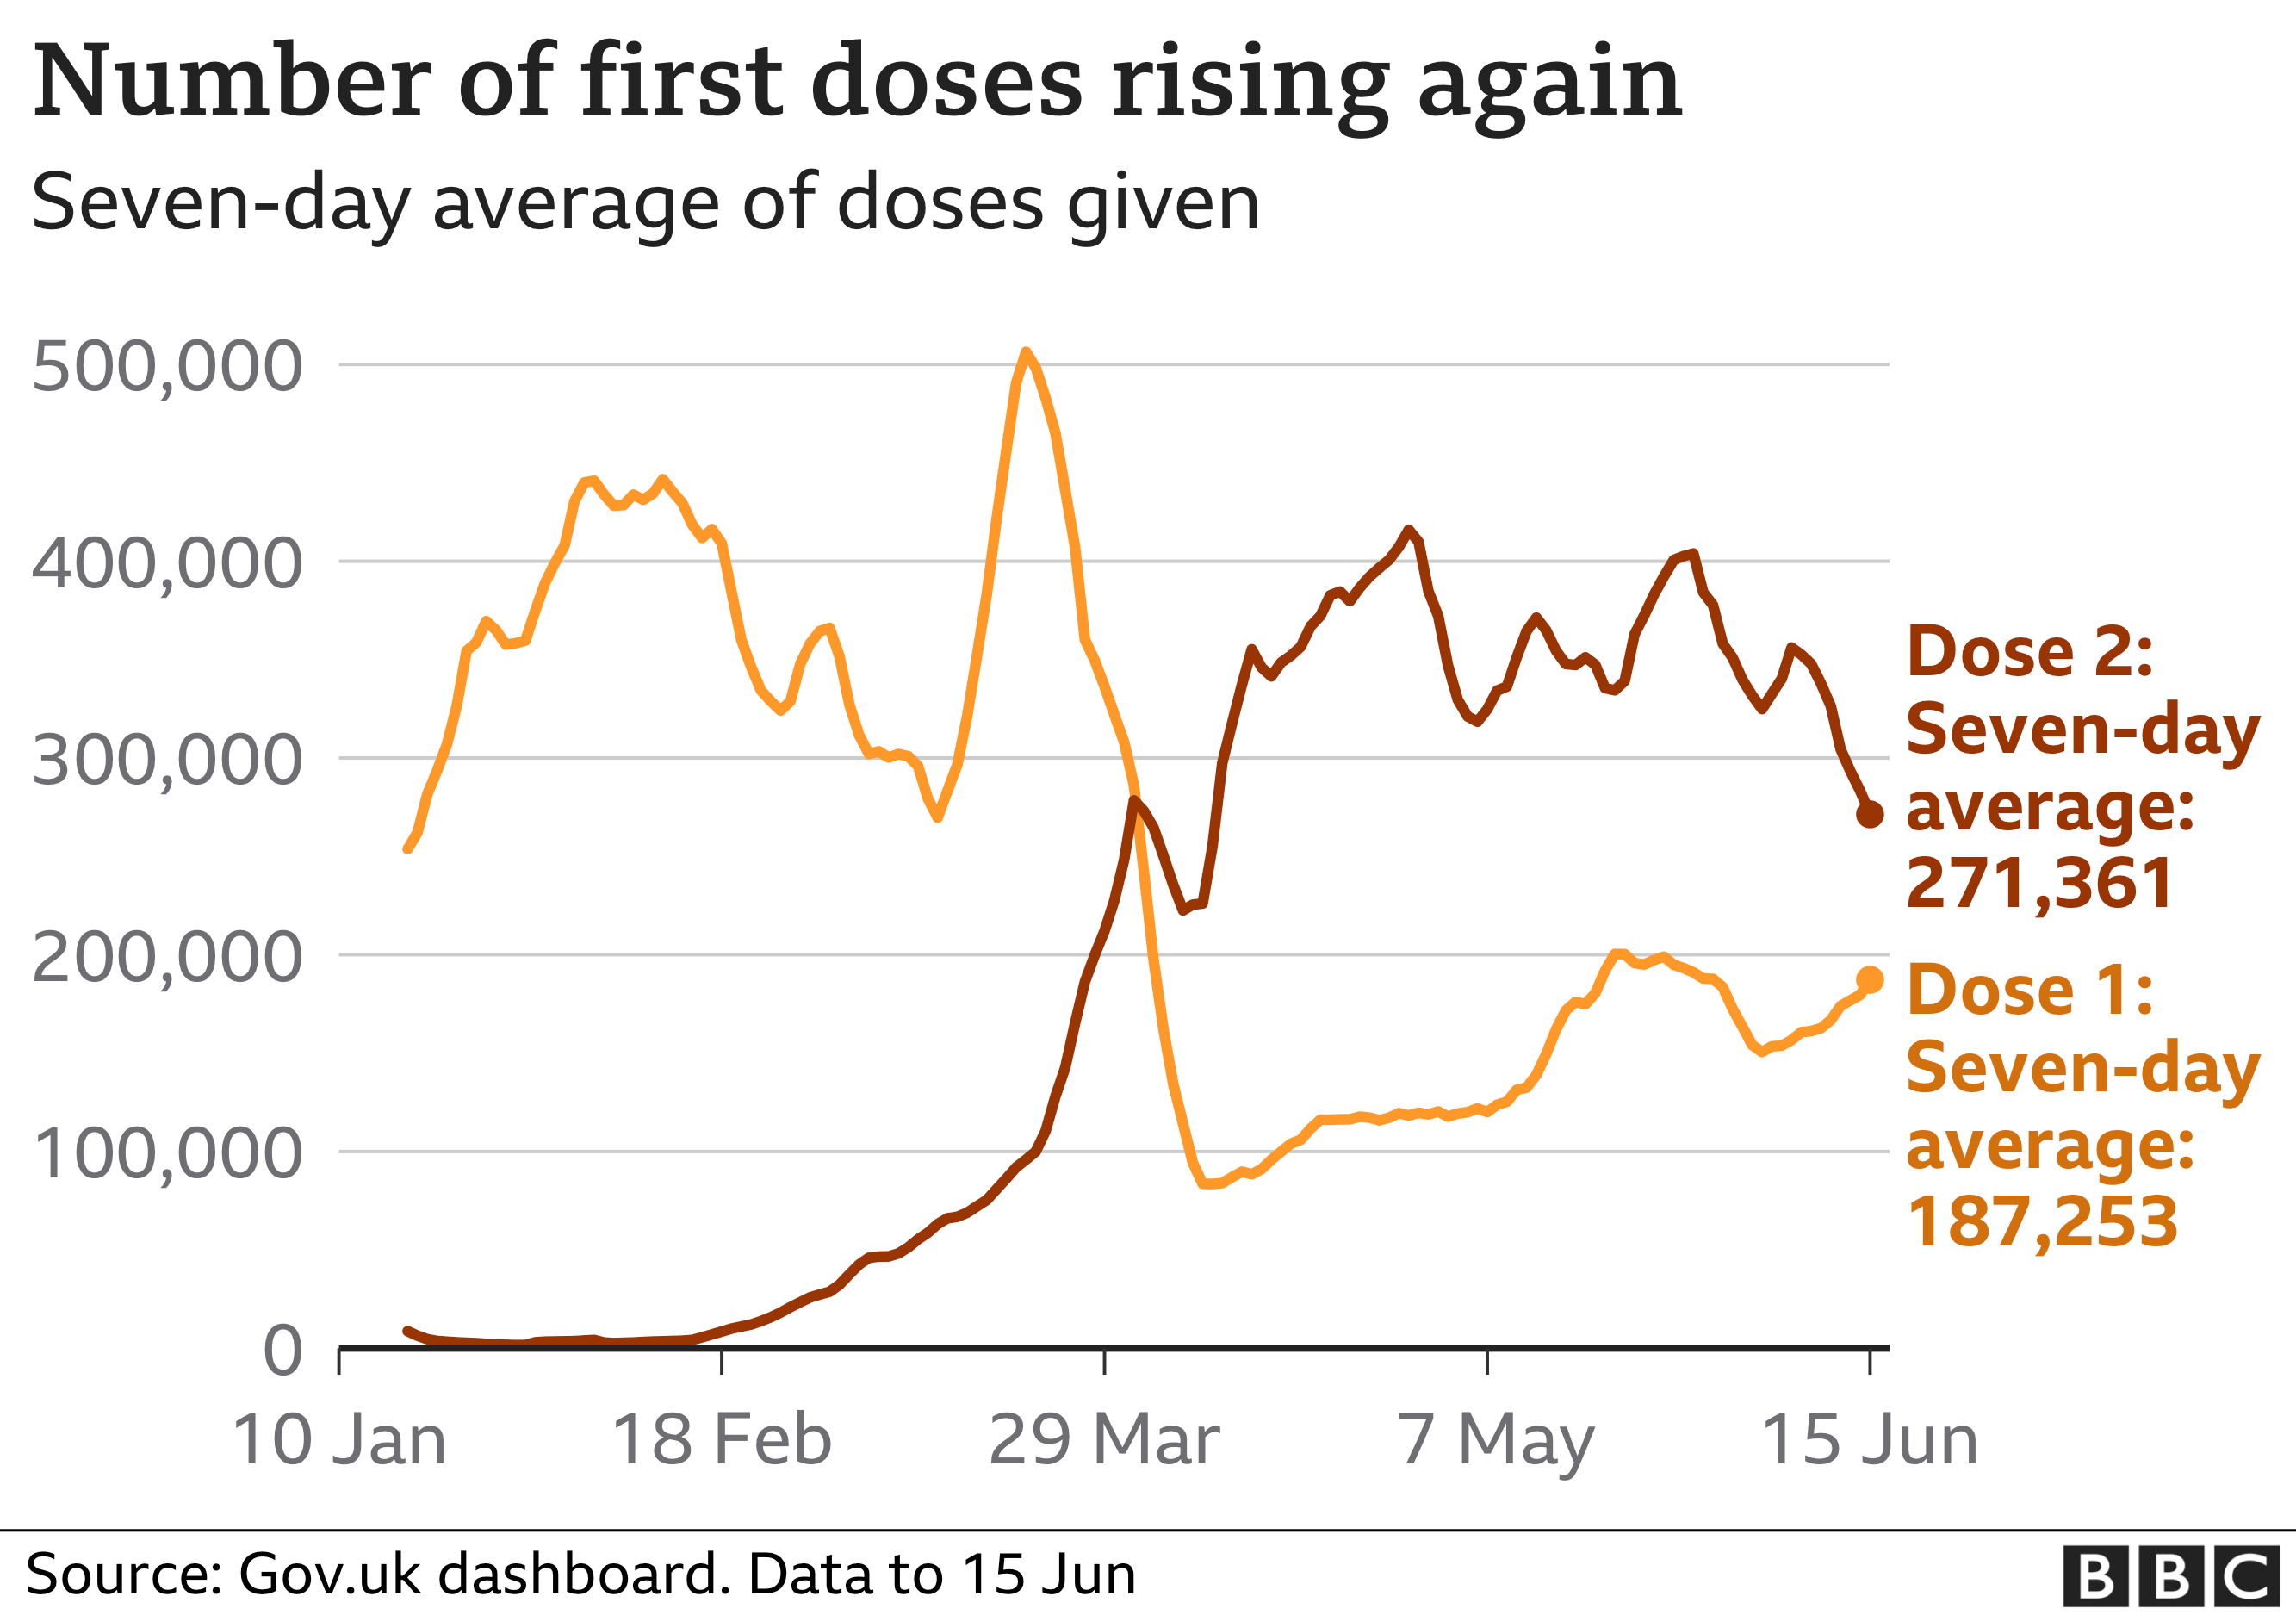 Chart showing that the number of first doses being administered in the UK is now rising again